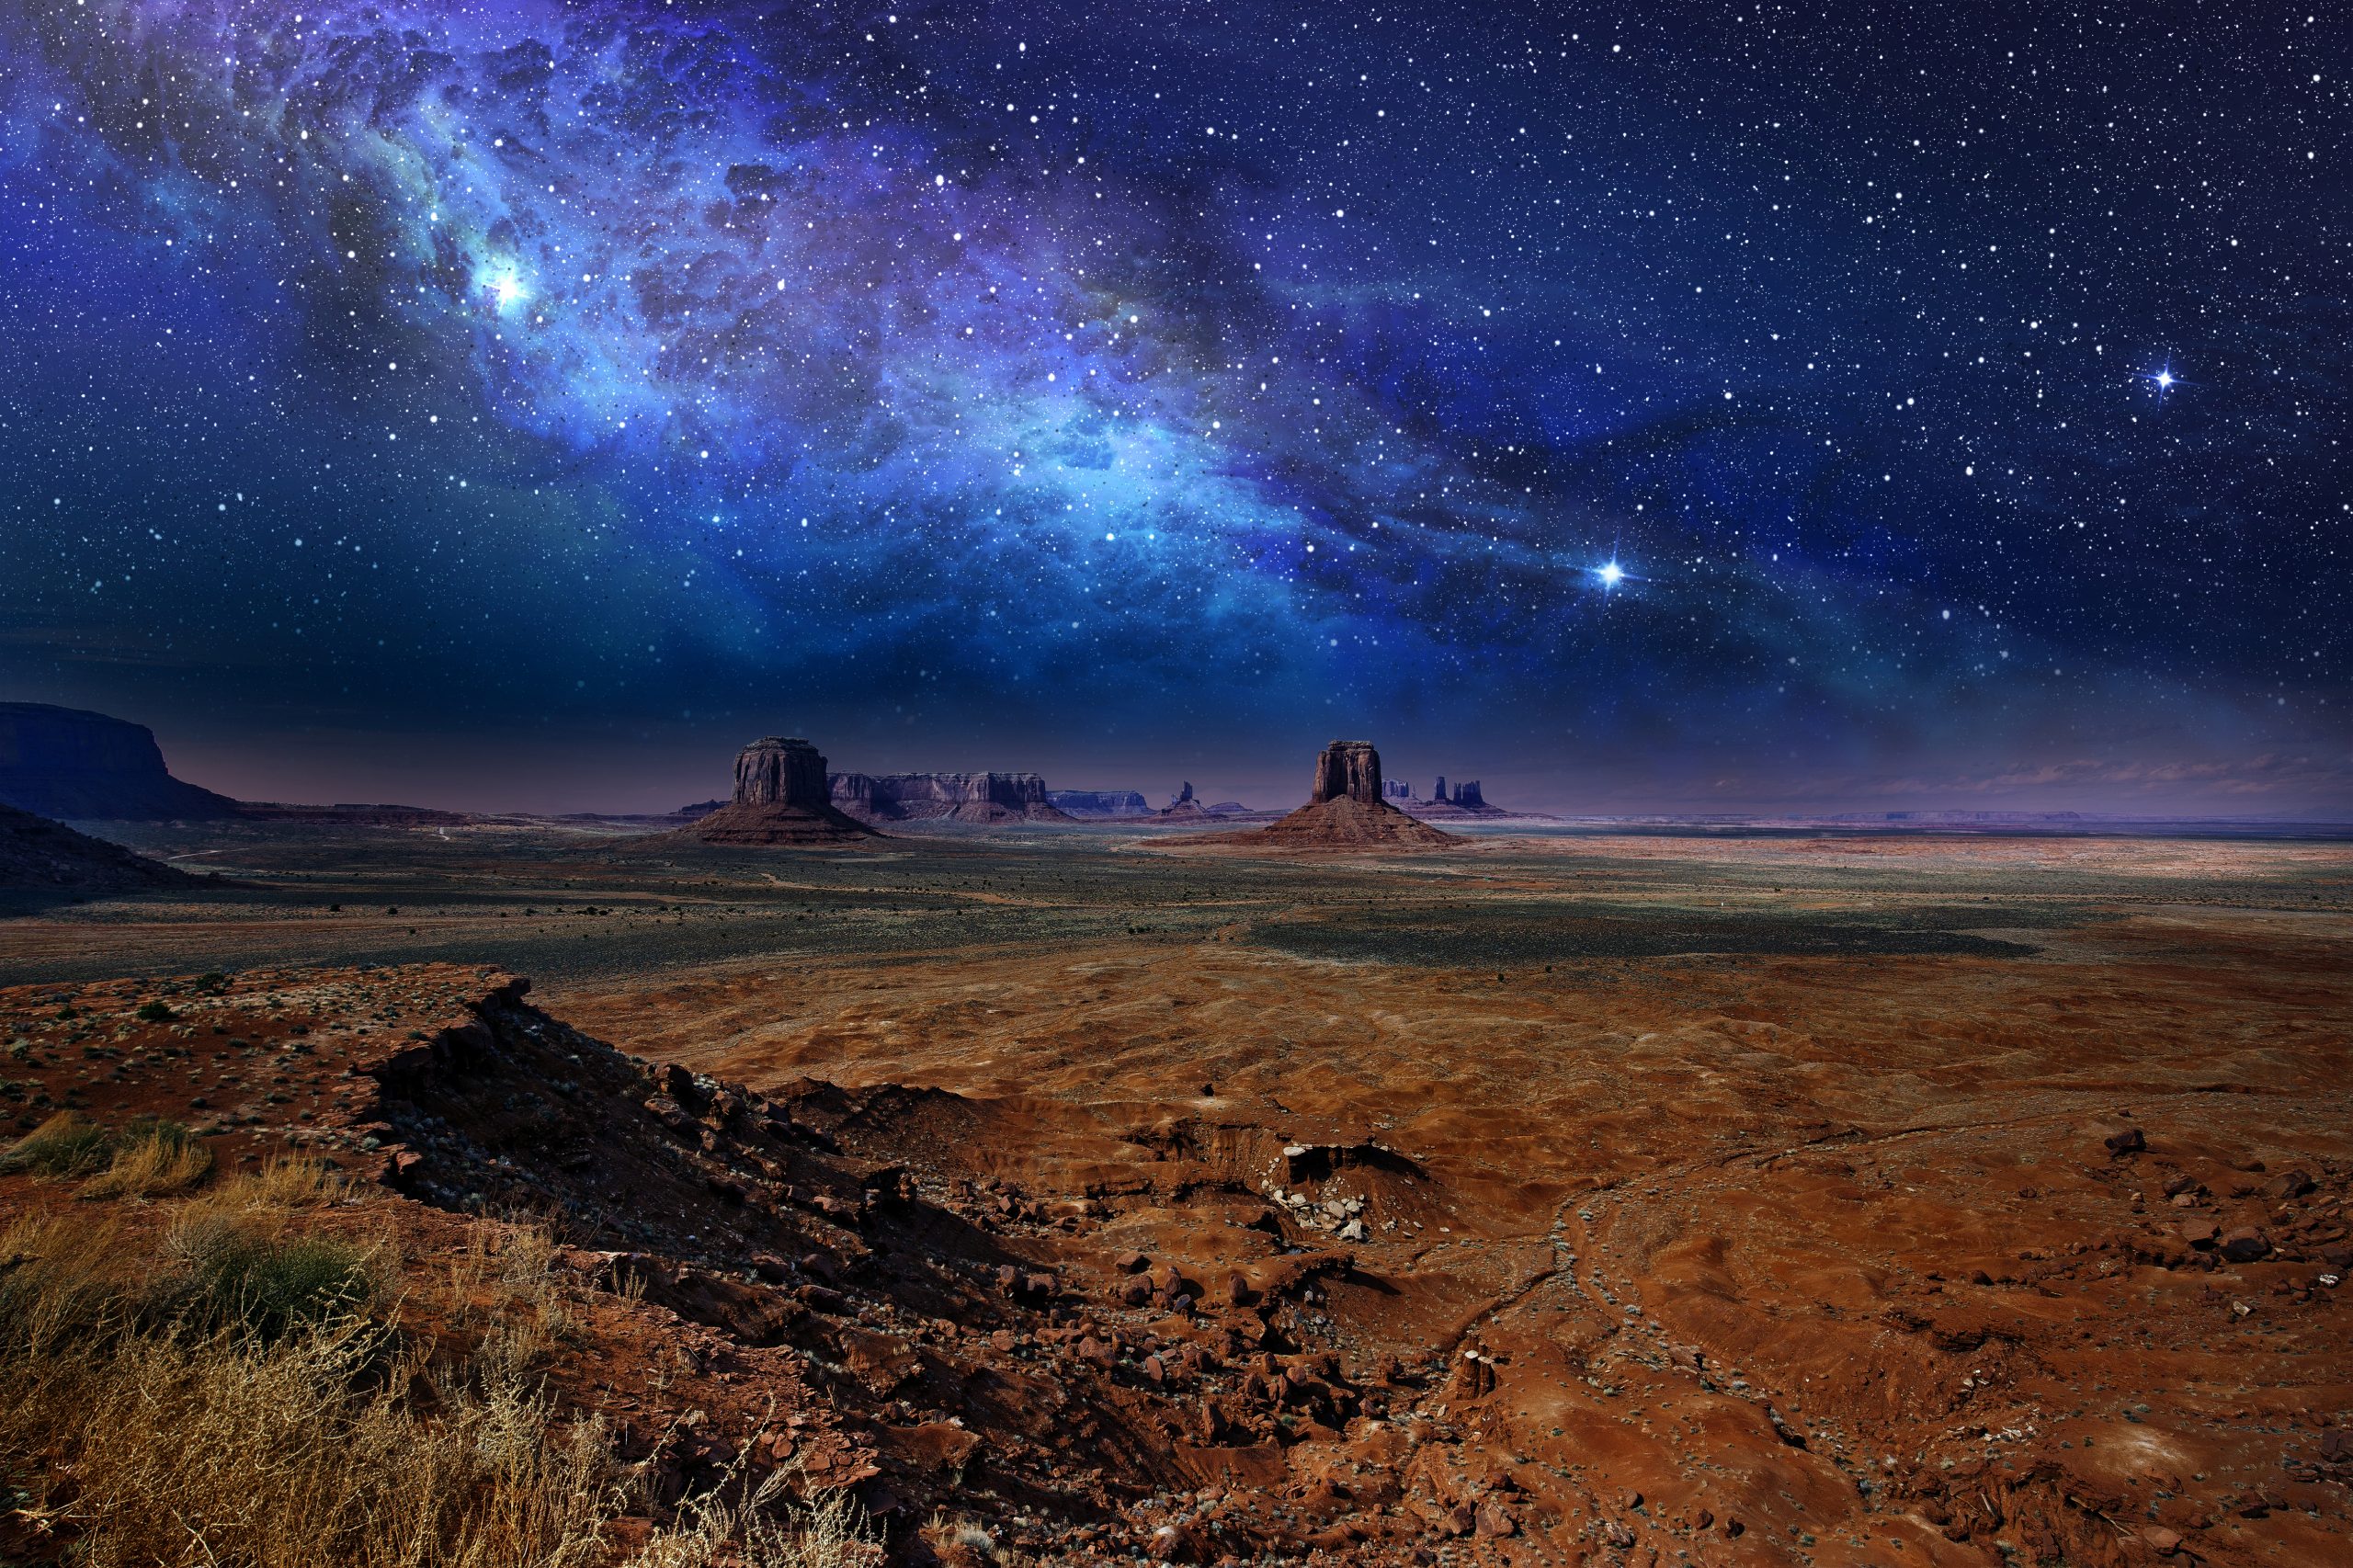 Desert with beautiful starry sky